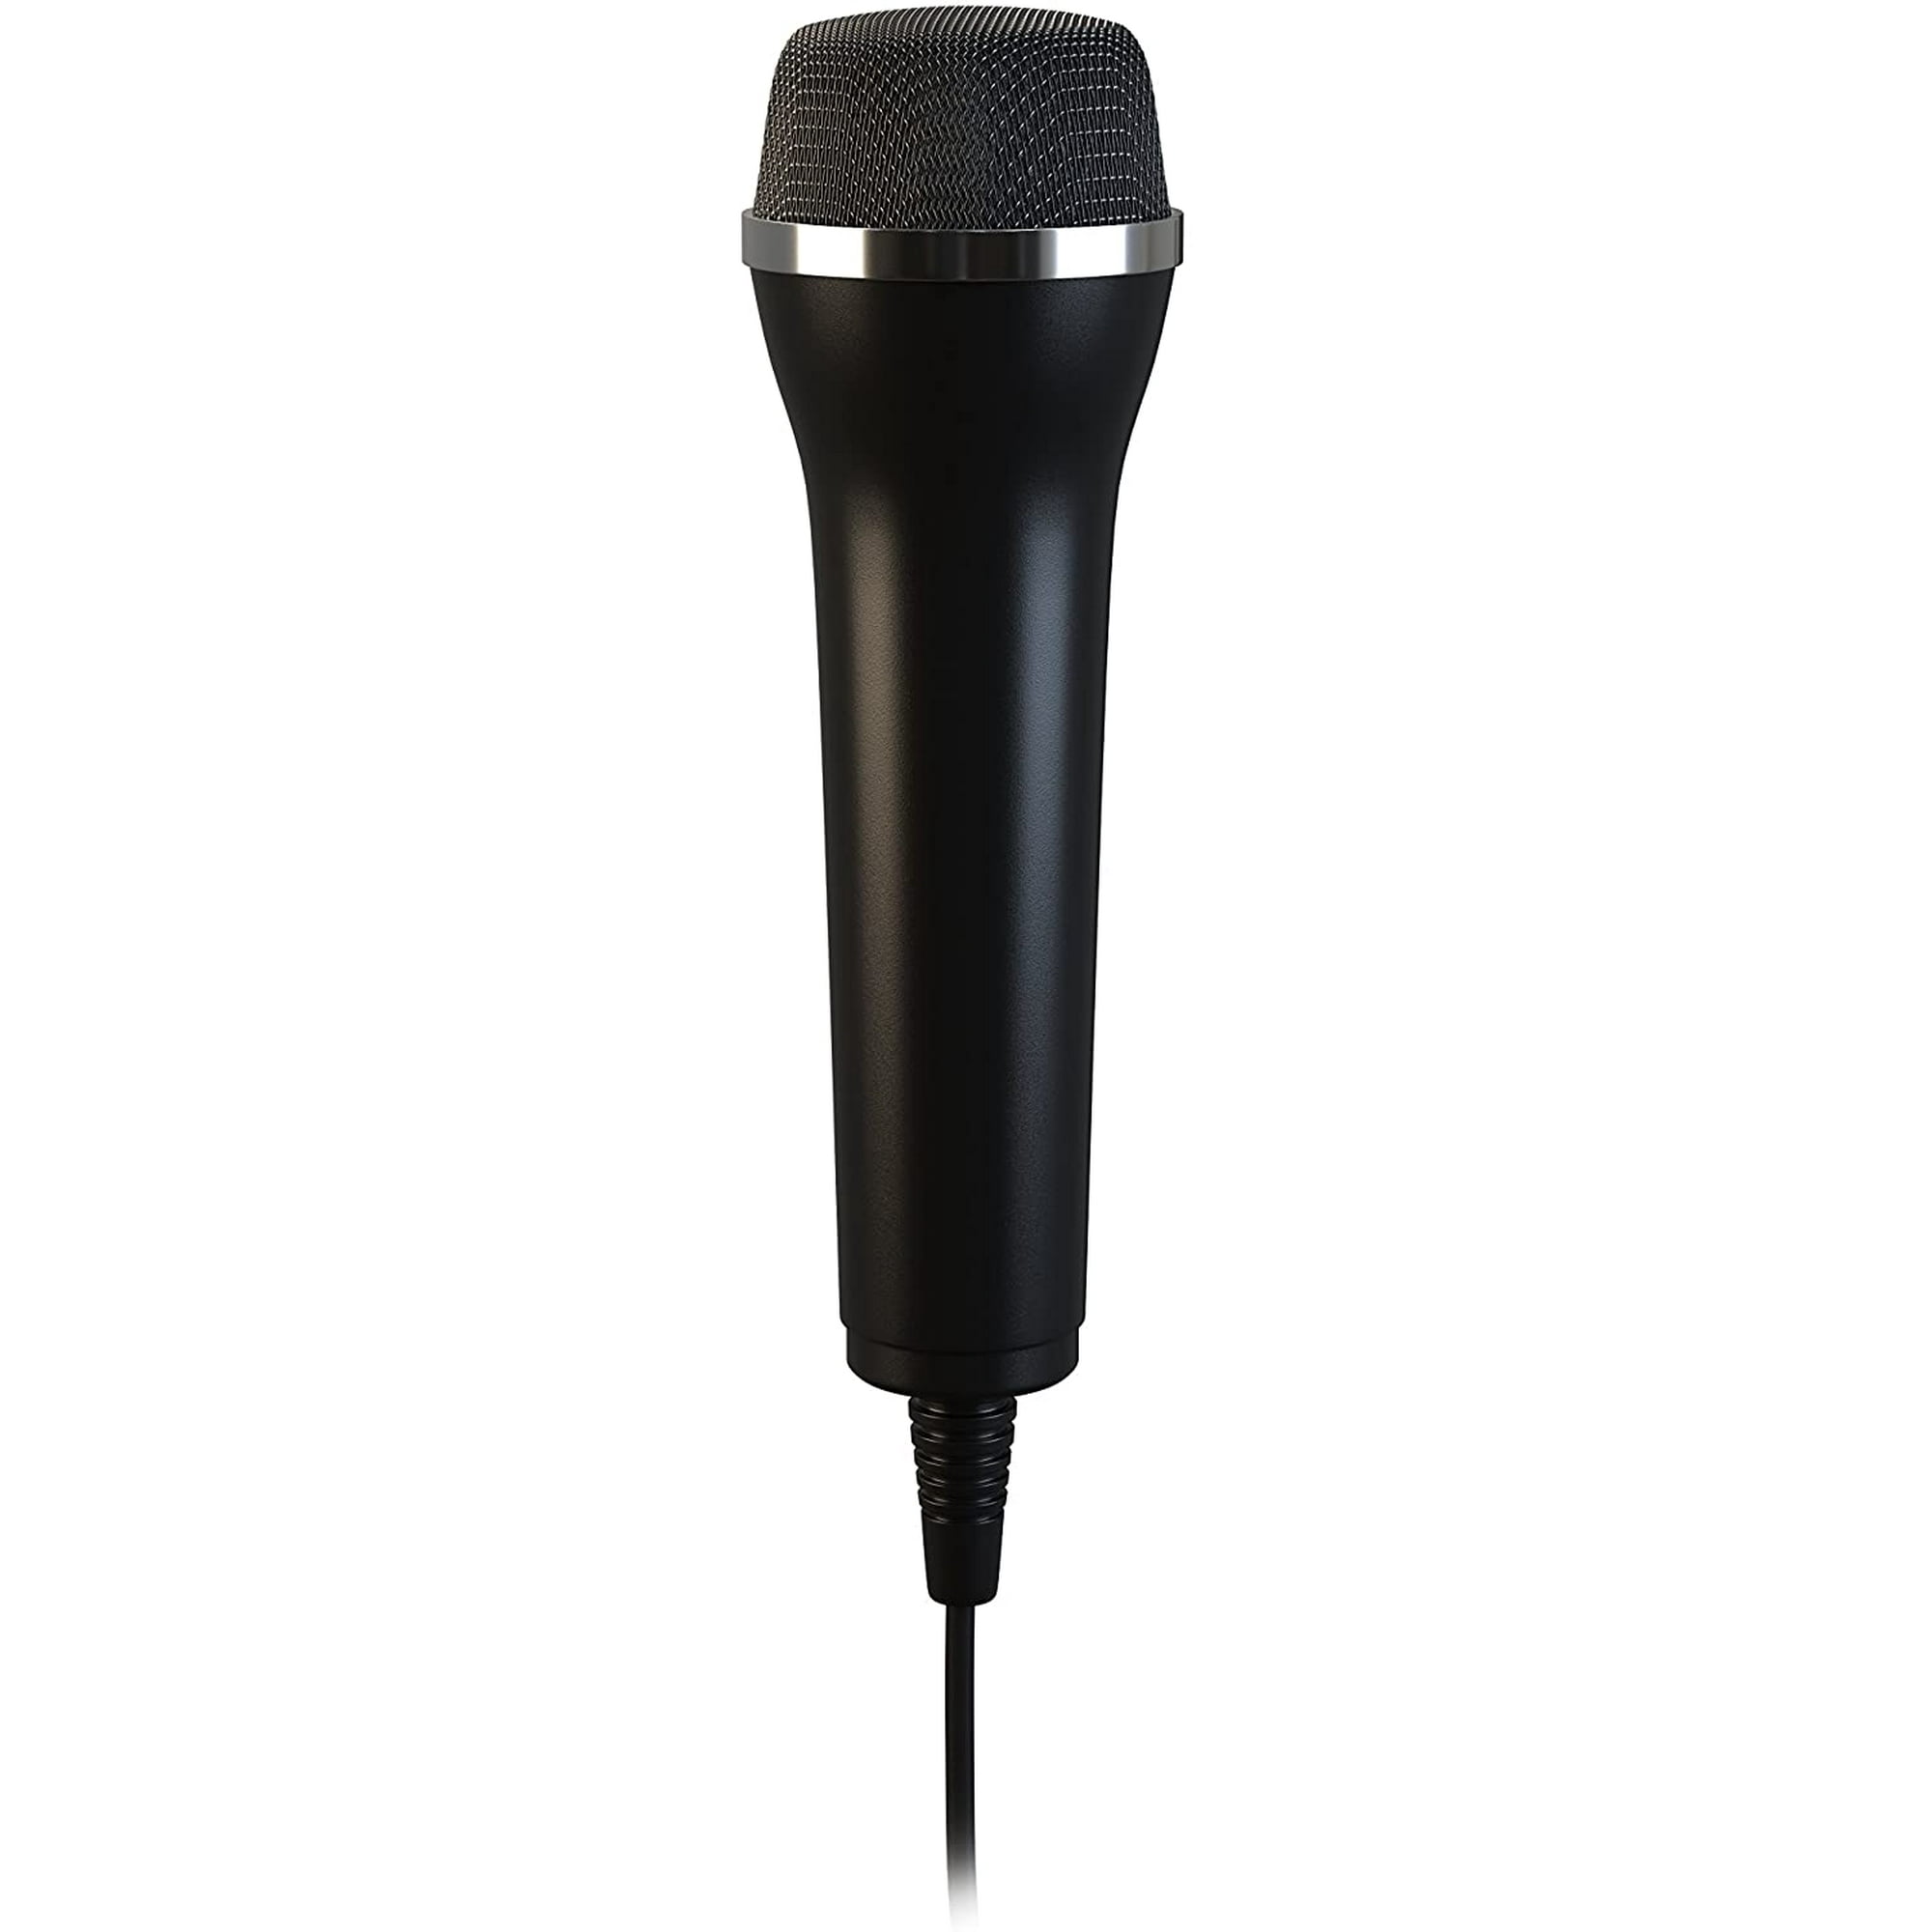 Microphone for Karaoke (SingStar, Sprach Deutschlands, Lets Sing, We Sing)  for PC, Wii, Xbox, Playstation (PS3, PS4, PS4 Pro), Switch, universal USB  microphone